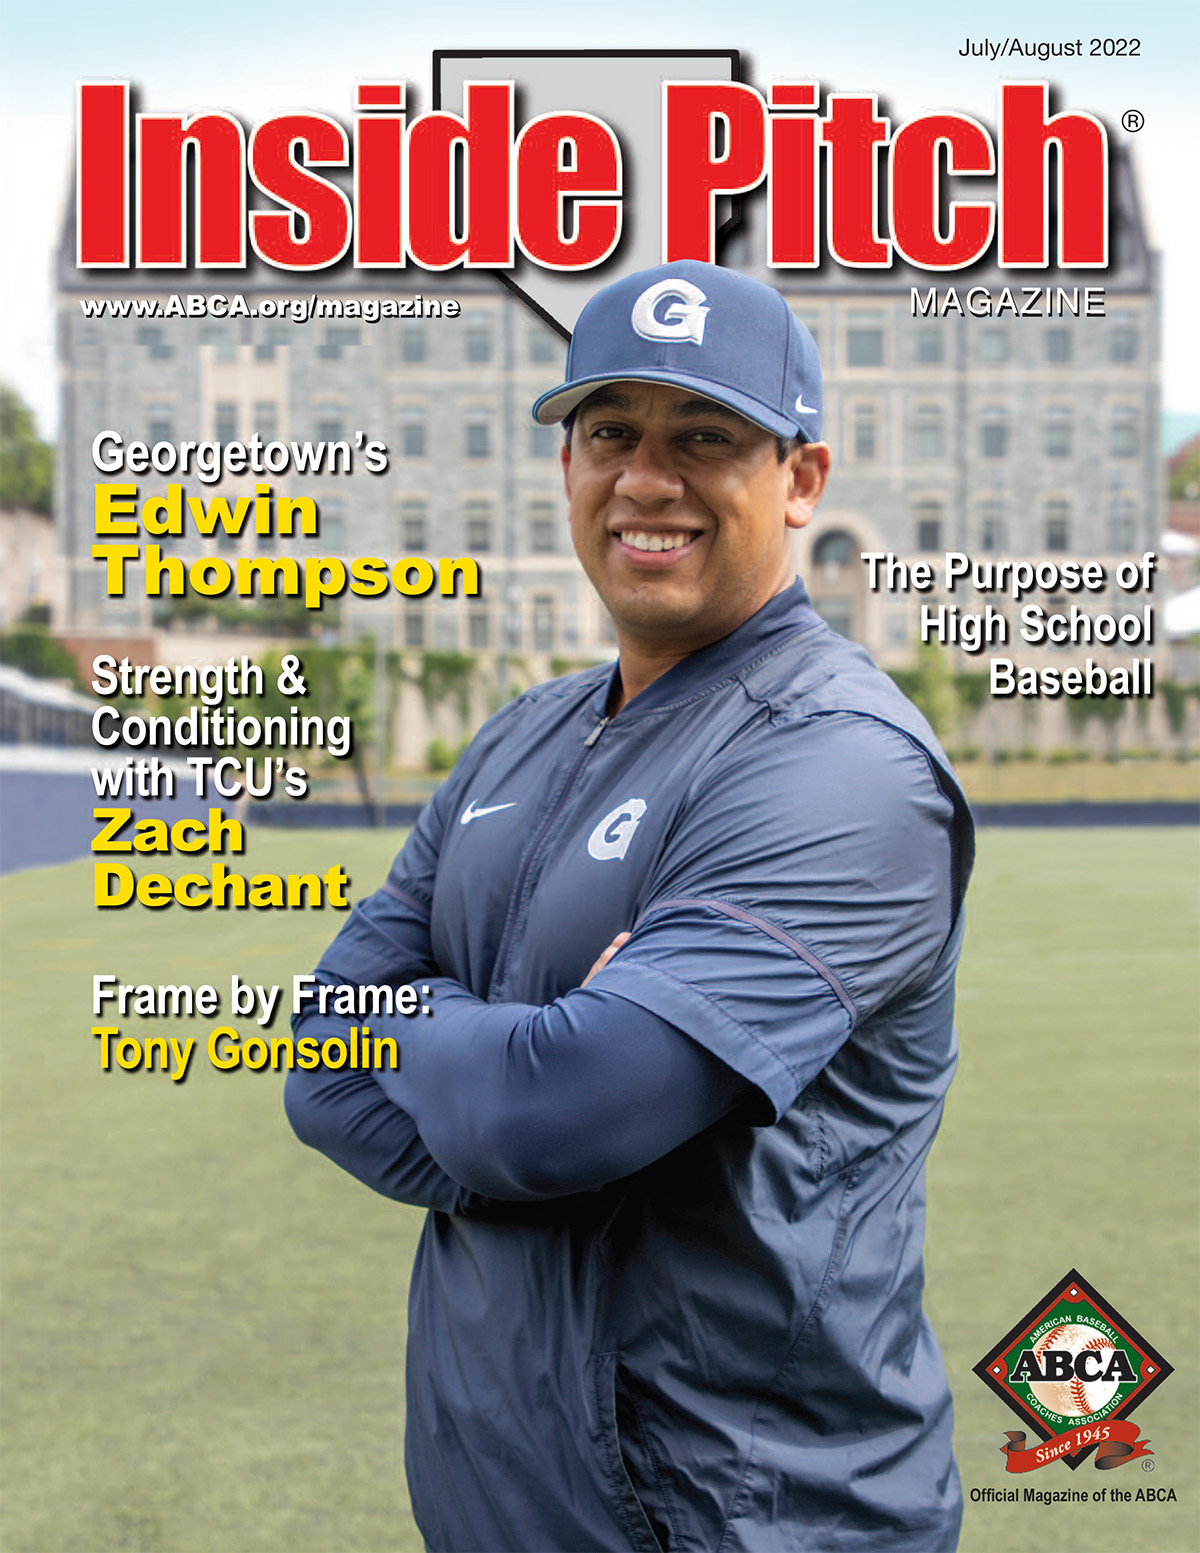 Inside Pitch Magazine July-August 2022 Issue